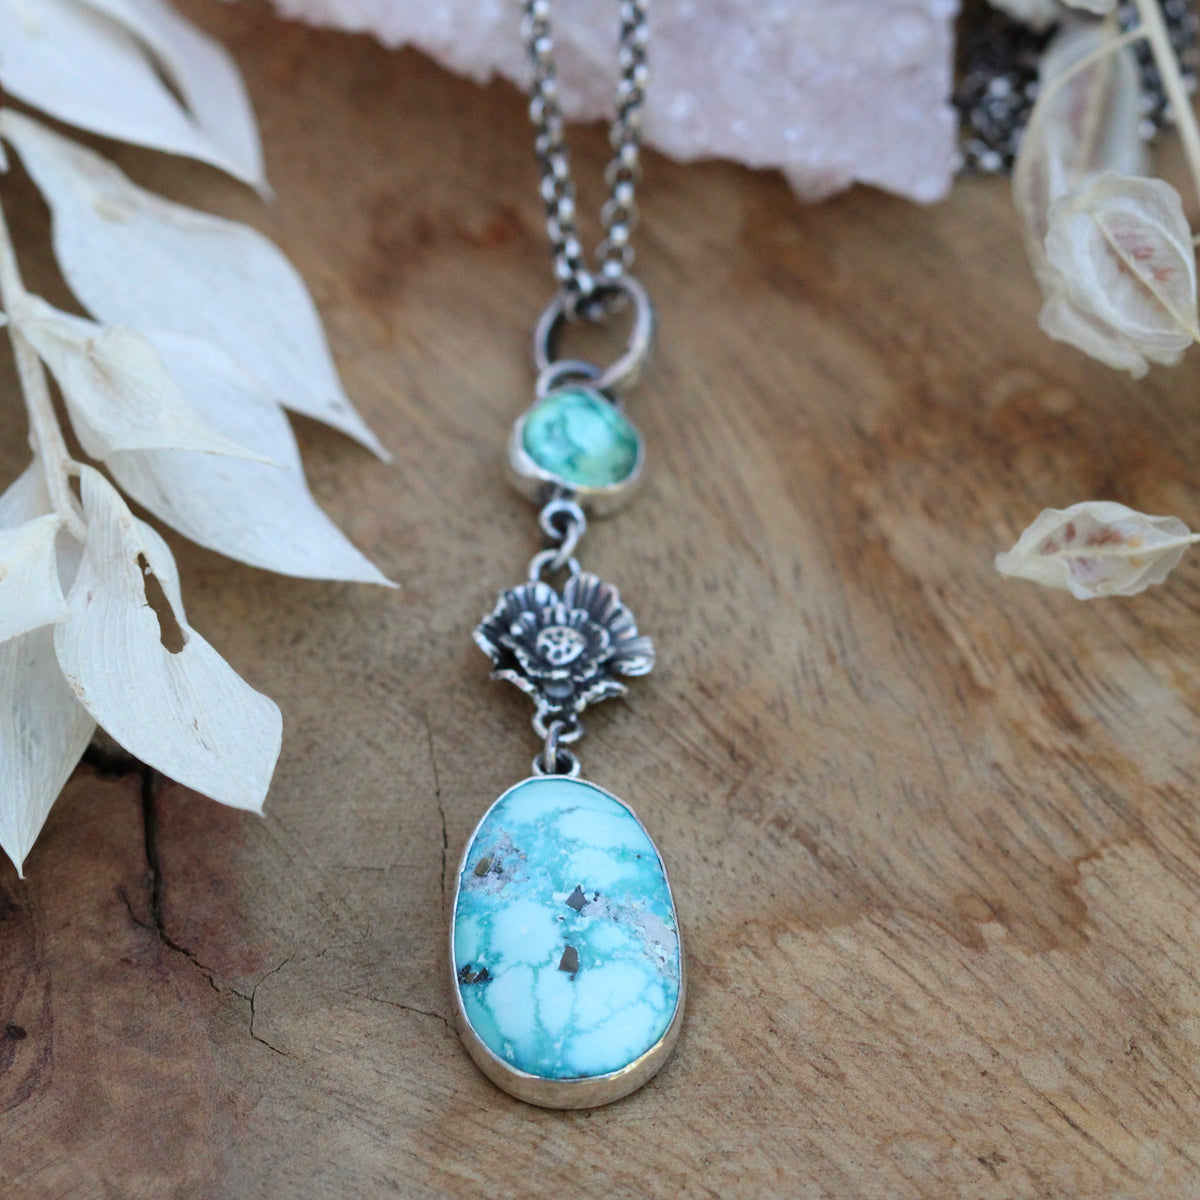 Wildflower Wanderings Turquoise apatite and poppy sterling silver necklace